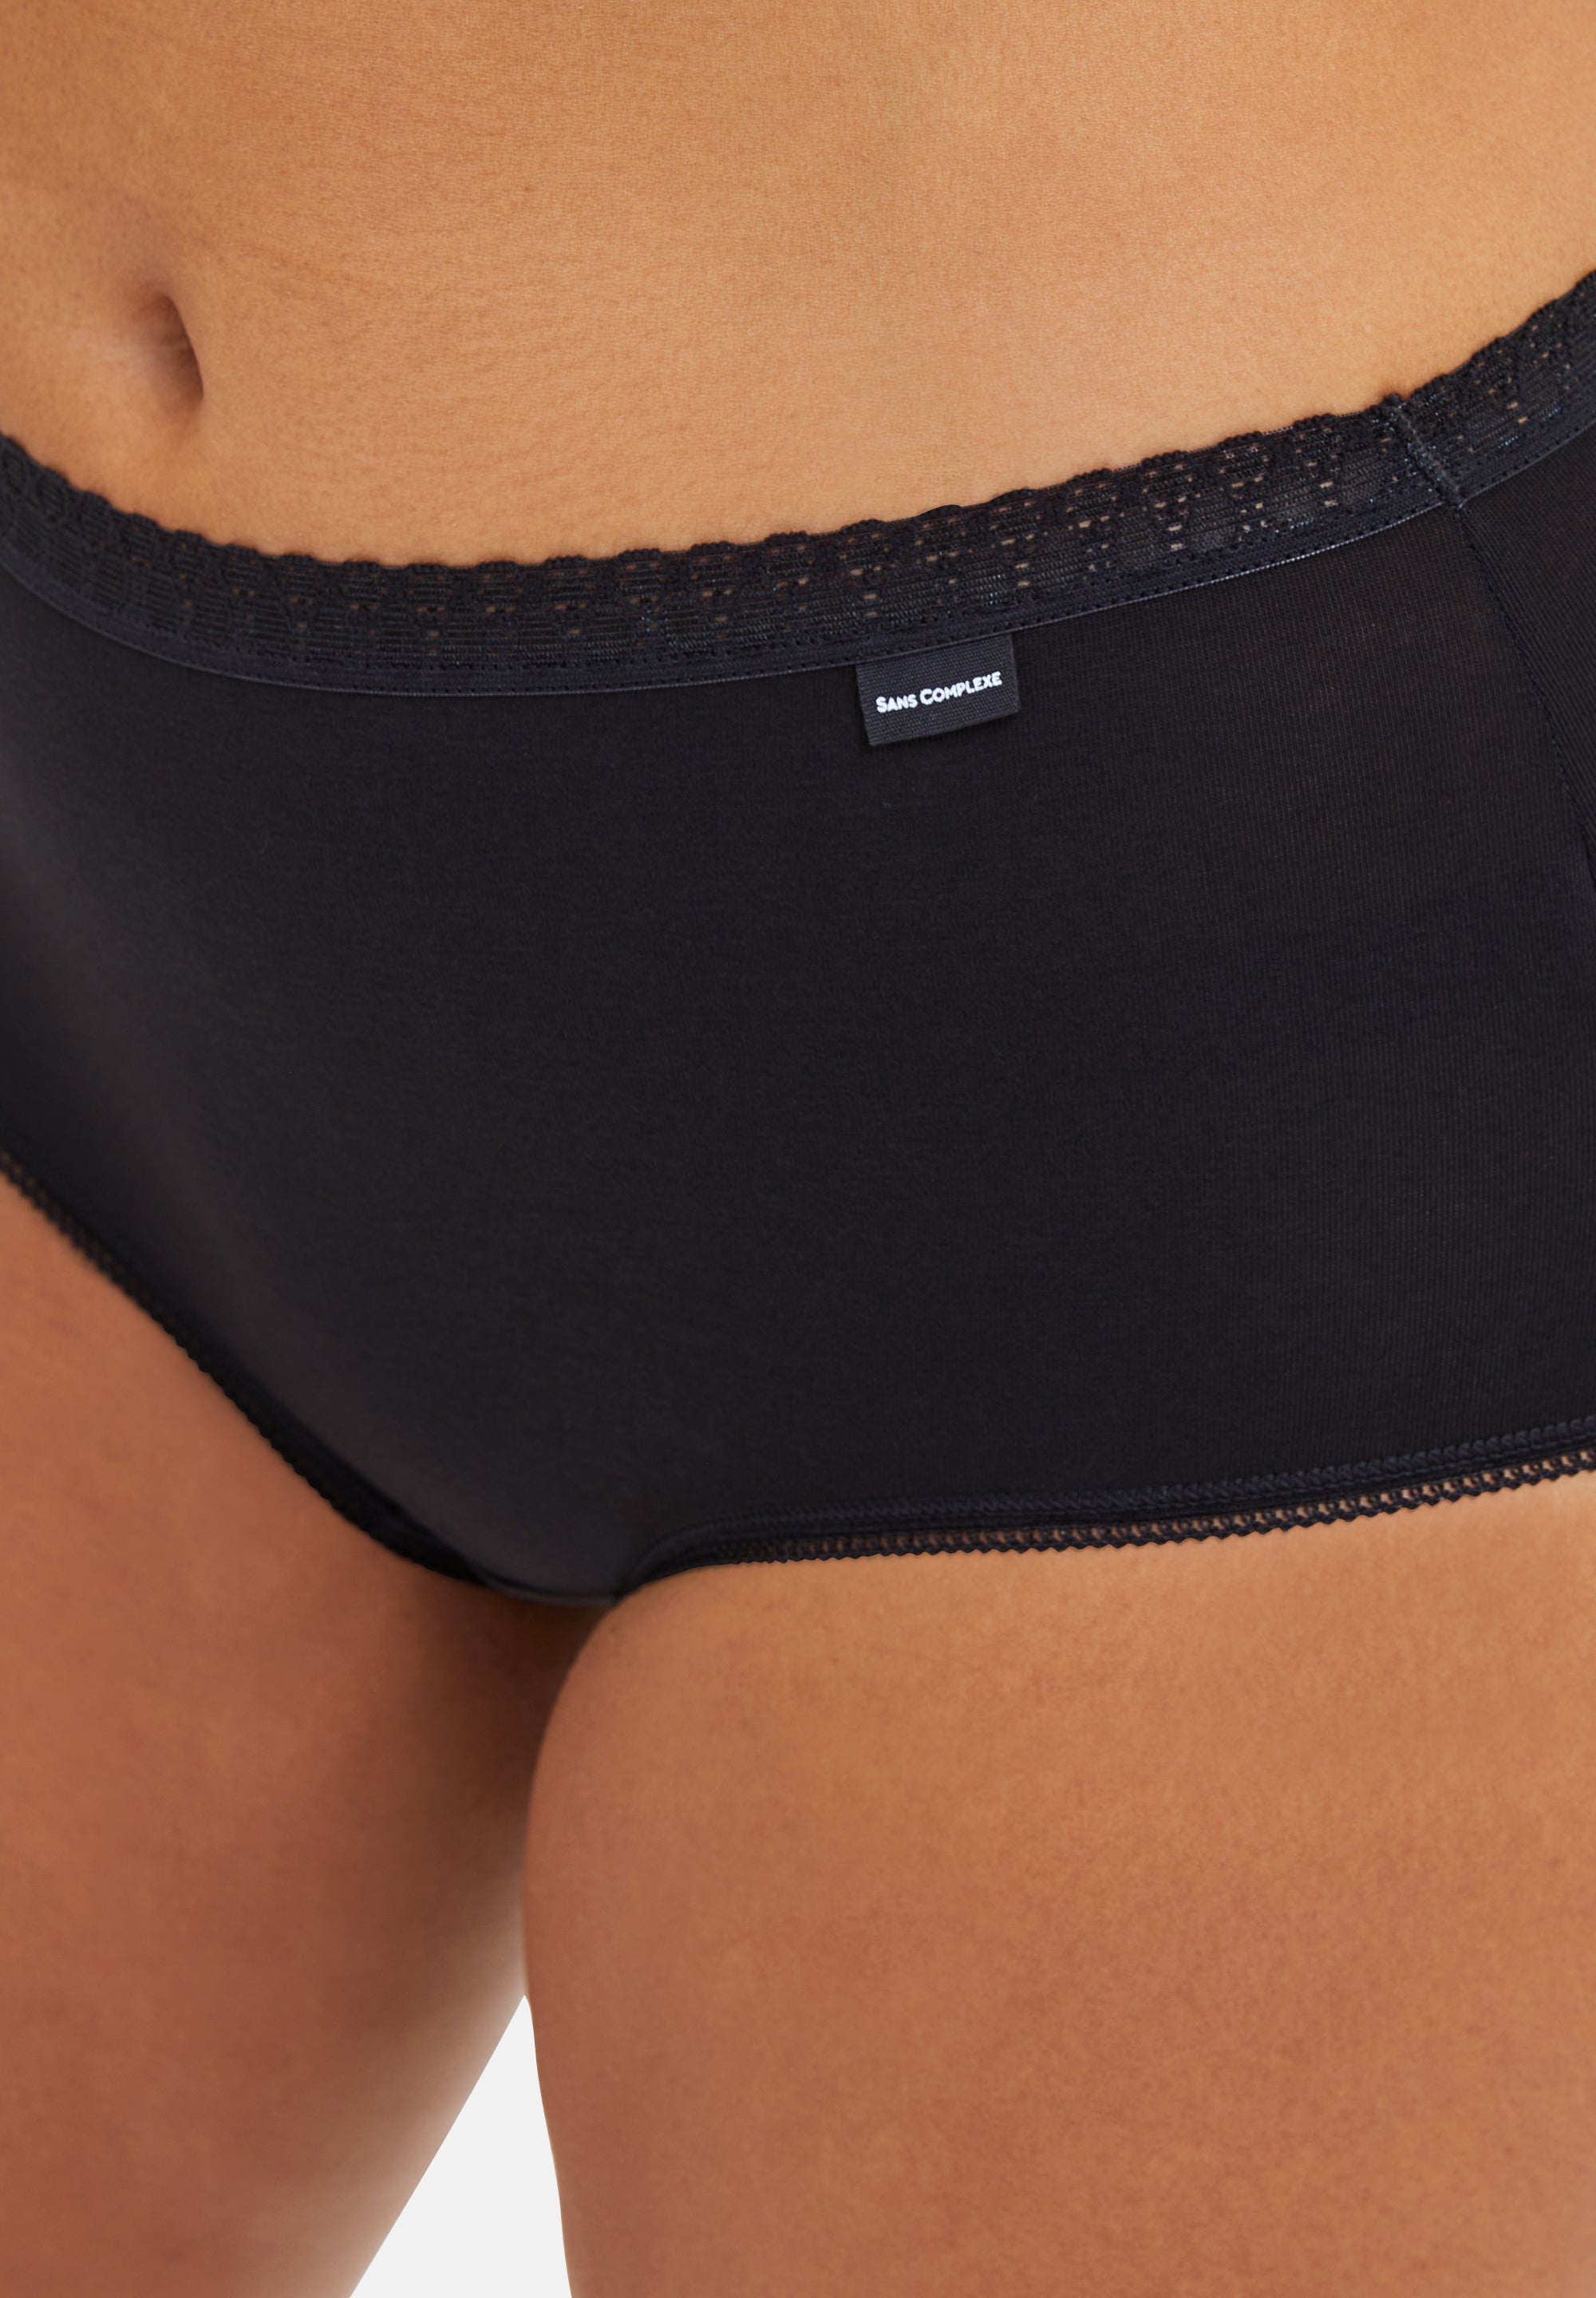 Briefs - Pack of 2 Classic Cotton Black